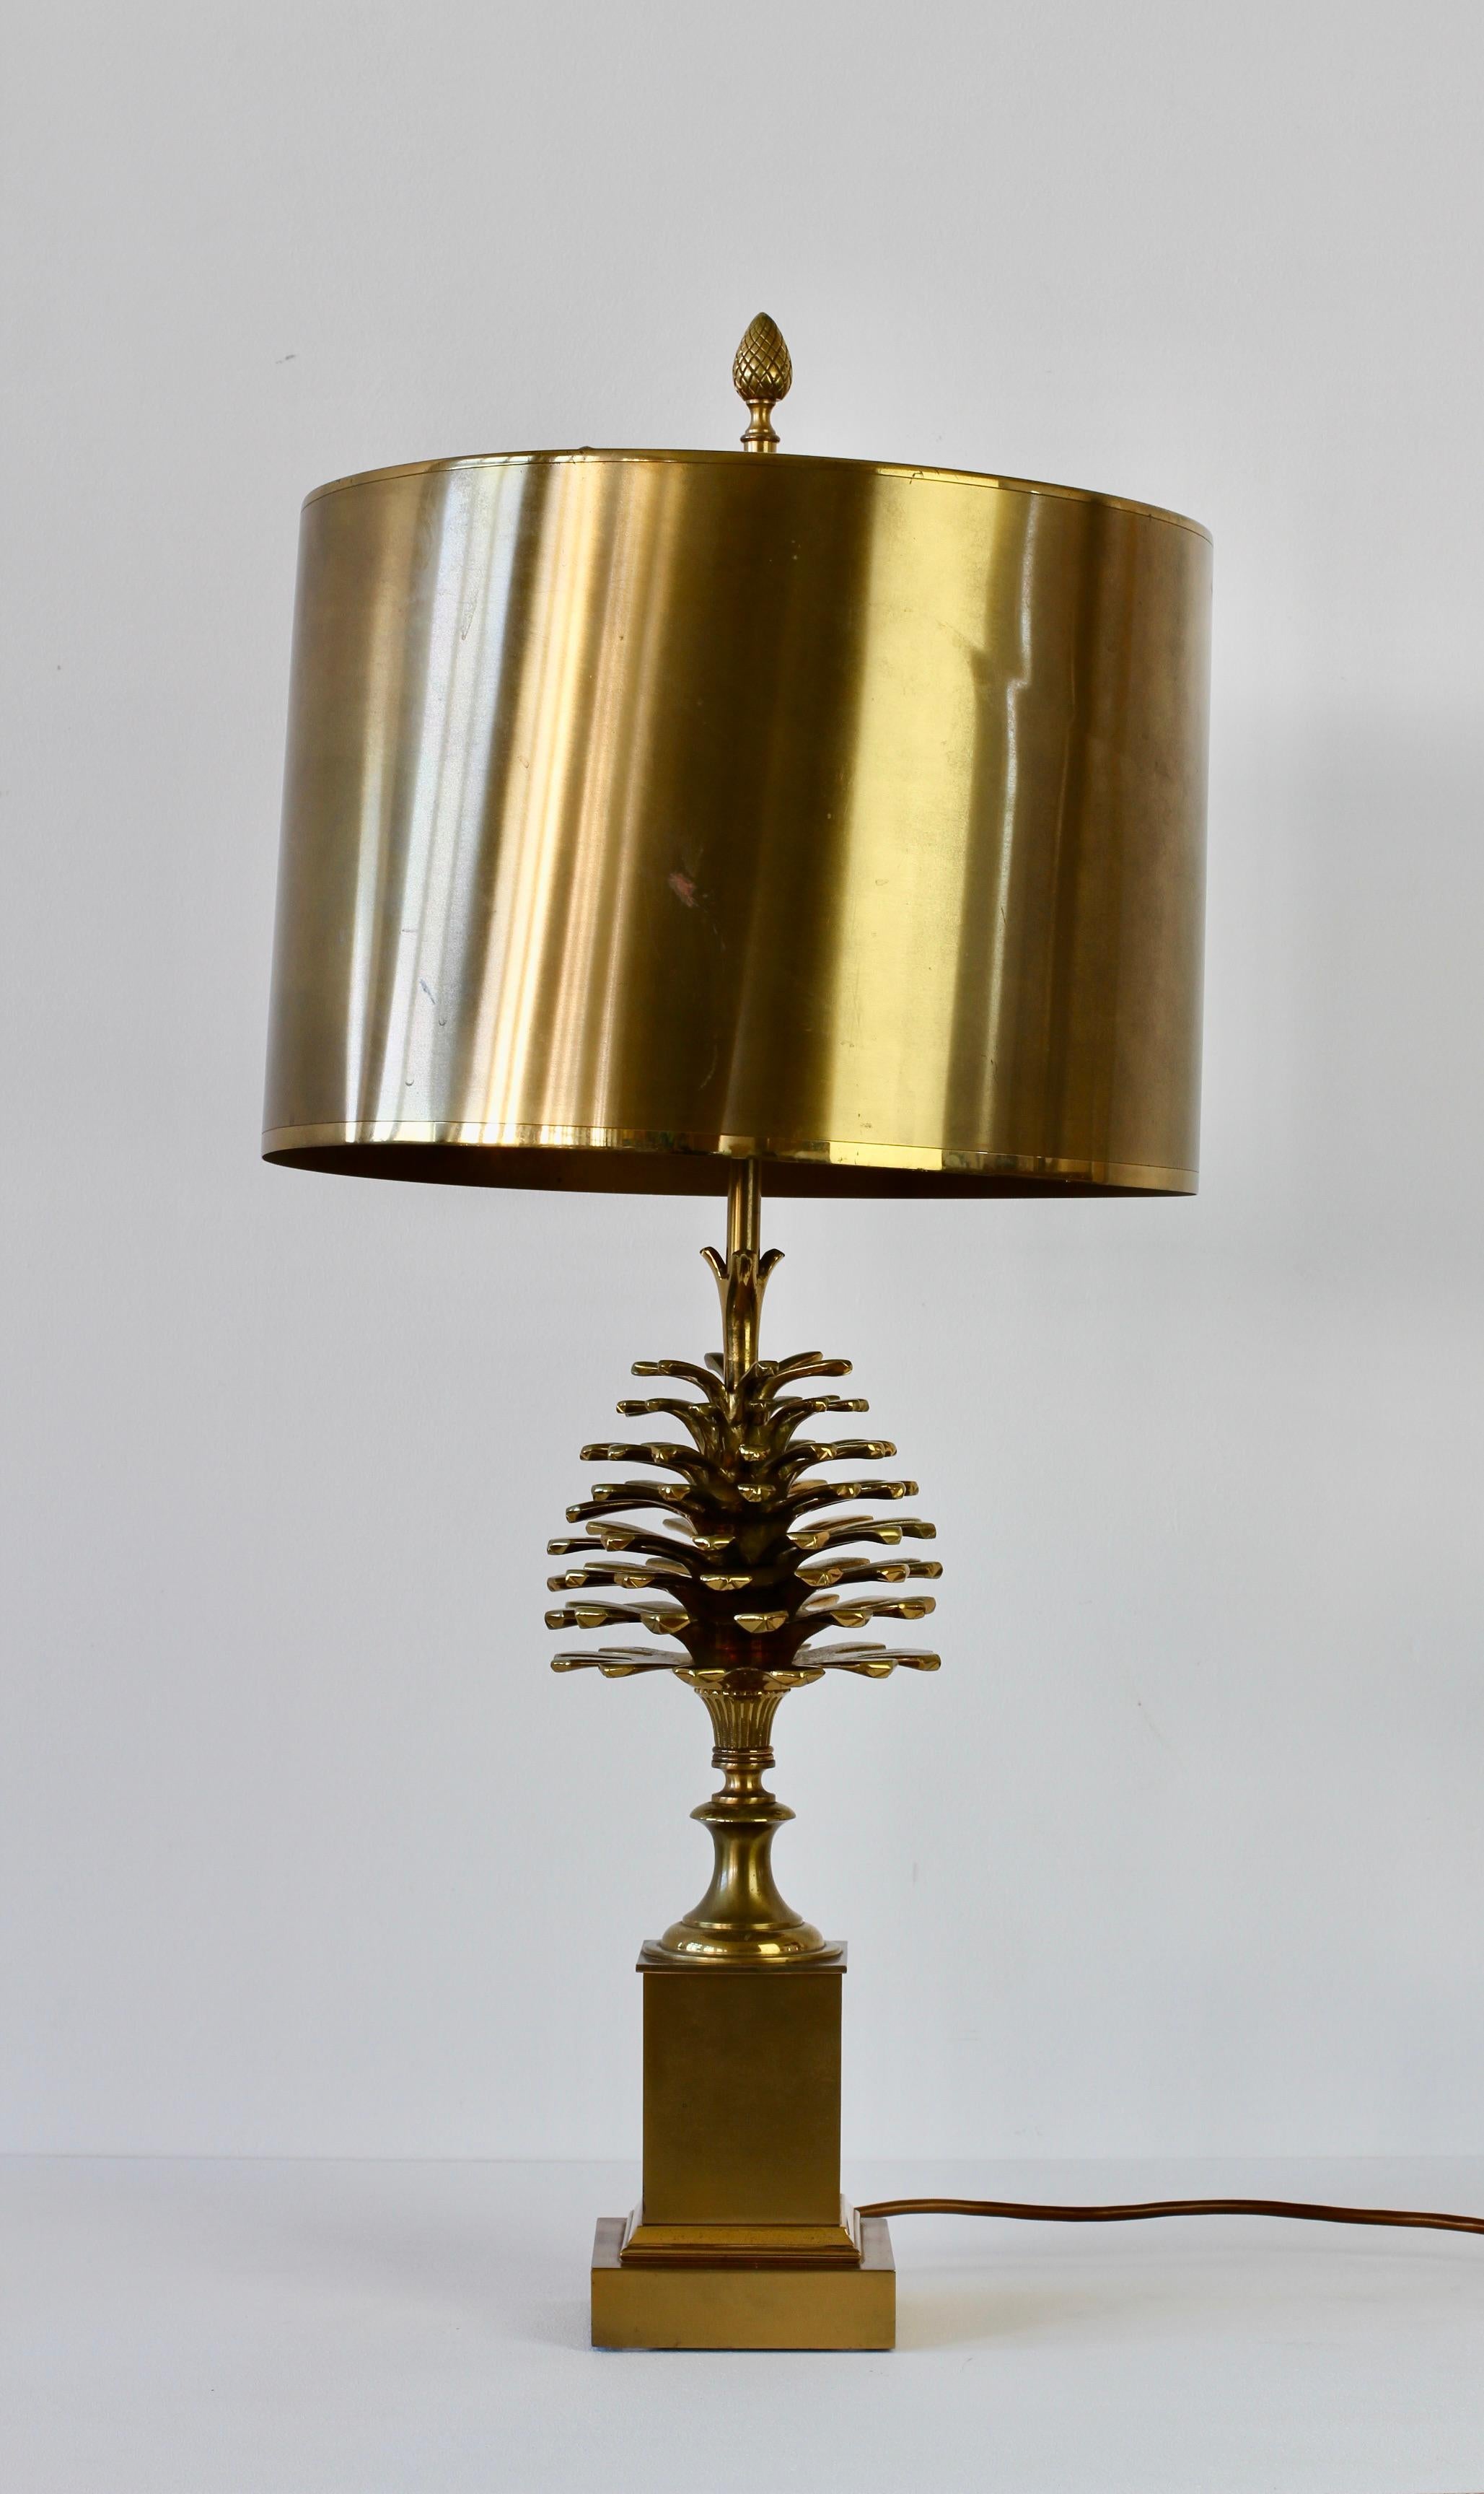 Maison Charles signed large patinated cast brass table lamp with original brass metal shade. Opulent, ornate and decadent, everything you would expect from beautifully crafted French design. Perfect for any Hollywood Regency home or lover of